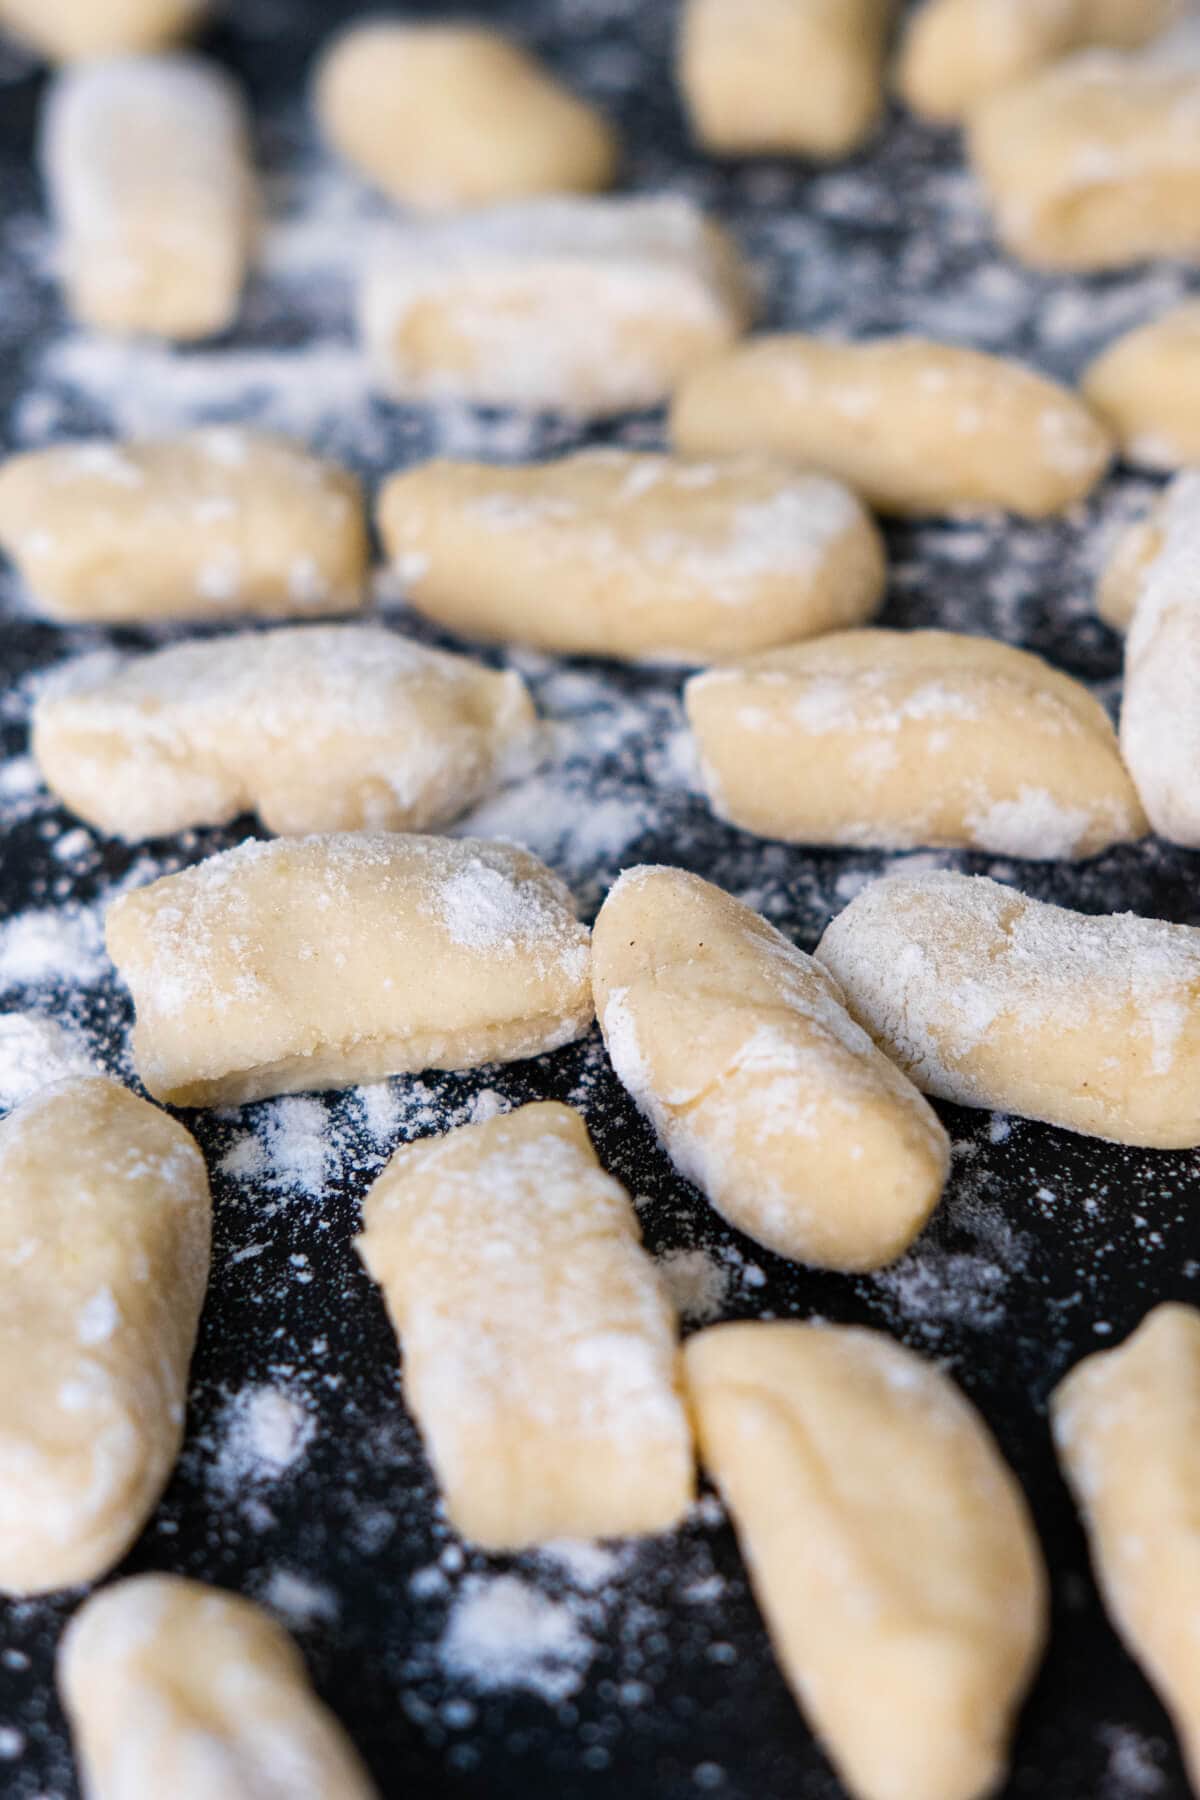 Close up of gnocchi, ready to be cooked.